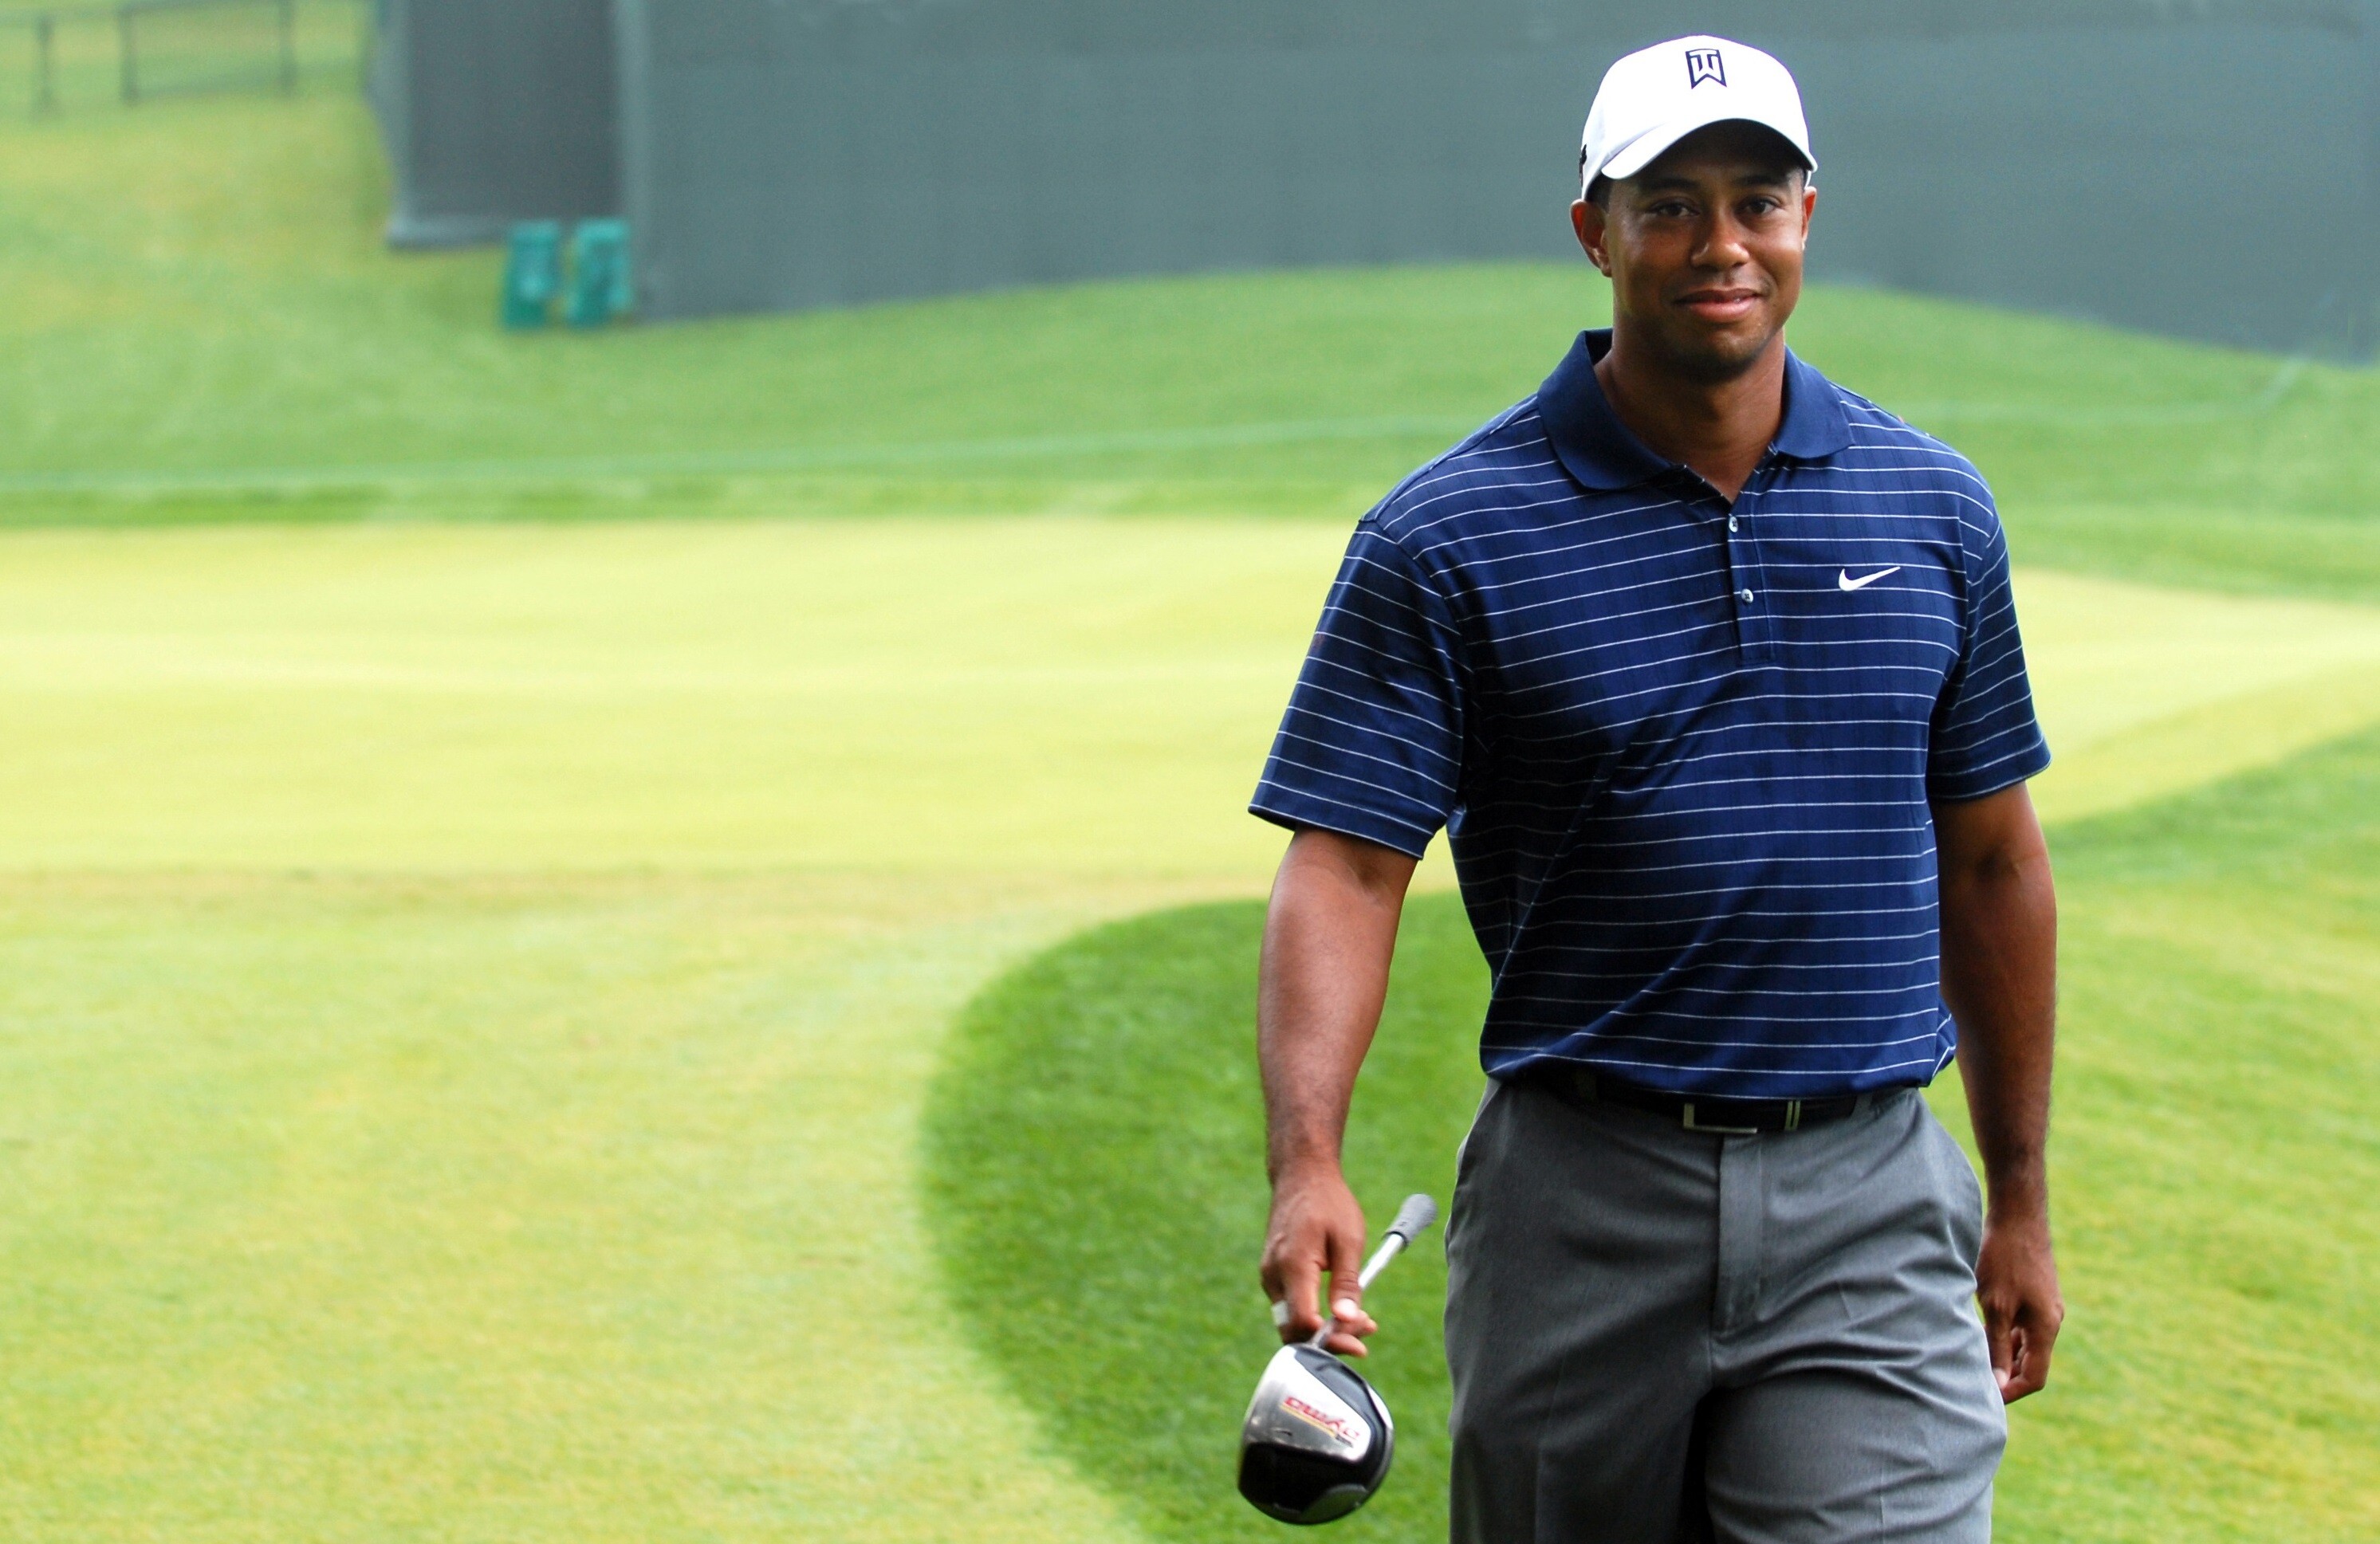 Tiger Woods: Eldrick Tont won the 1997 Masters by 12 strokes in a record-breaking performance. 2990x1940 HD Wallpaper.